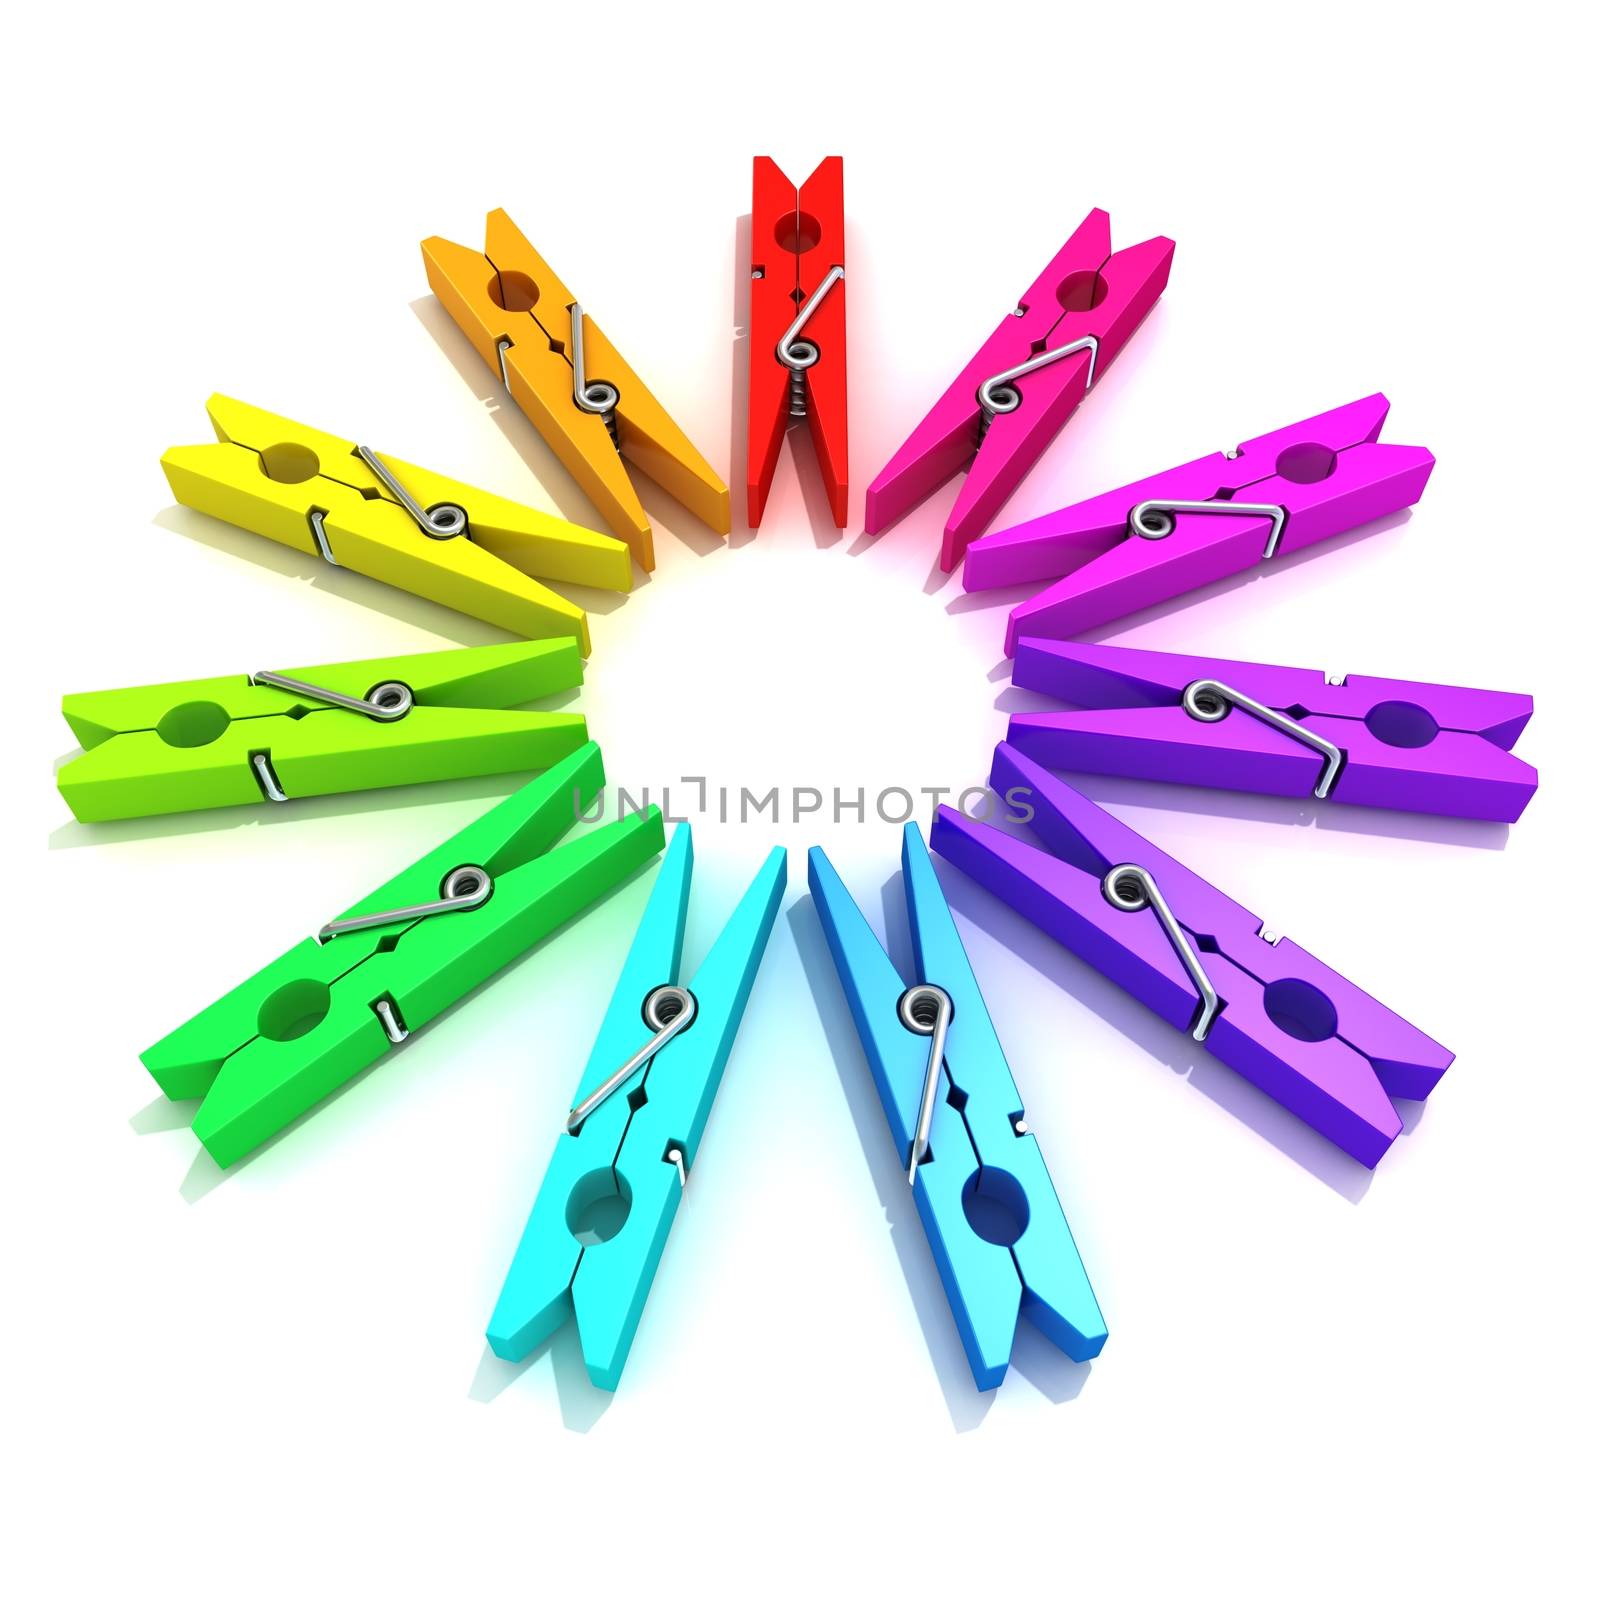 Clothes pins color wheel 3D render illustration isolated on white background